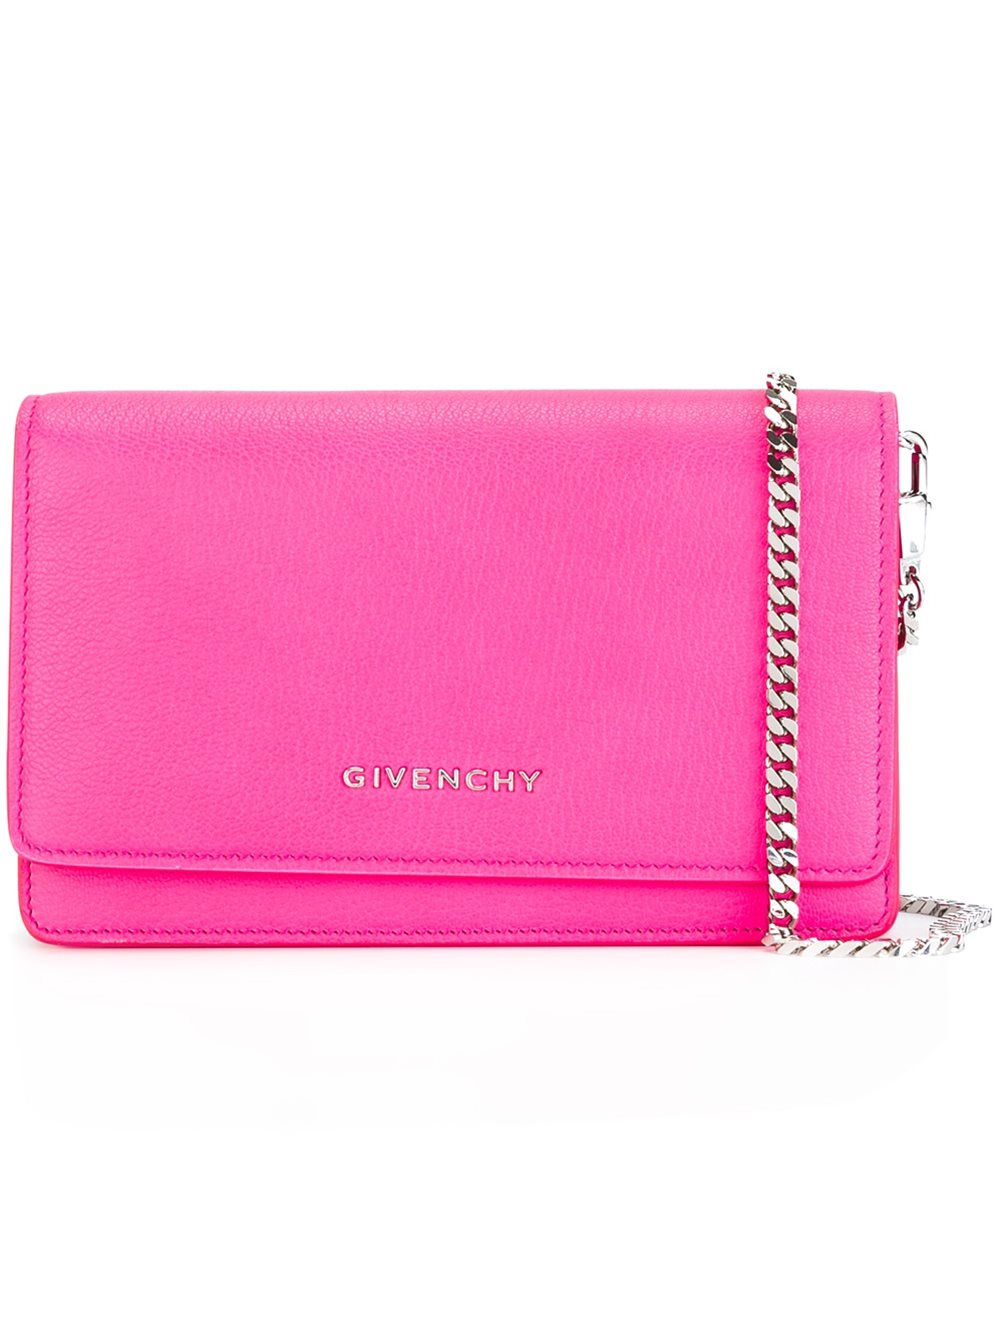 Lyst - Givenchy Pandora Chain Wallet Clutch in Pink